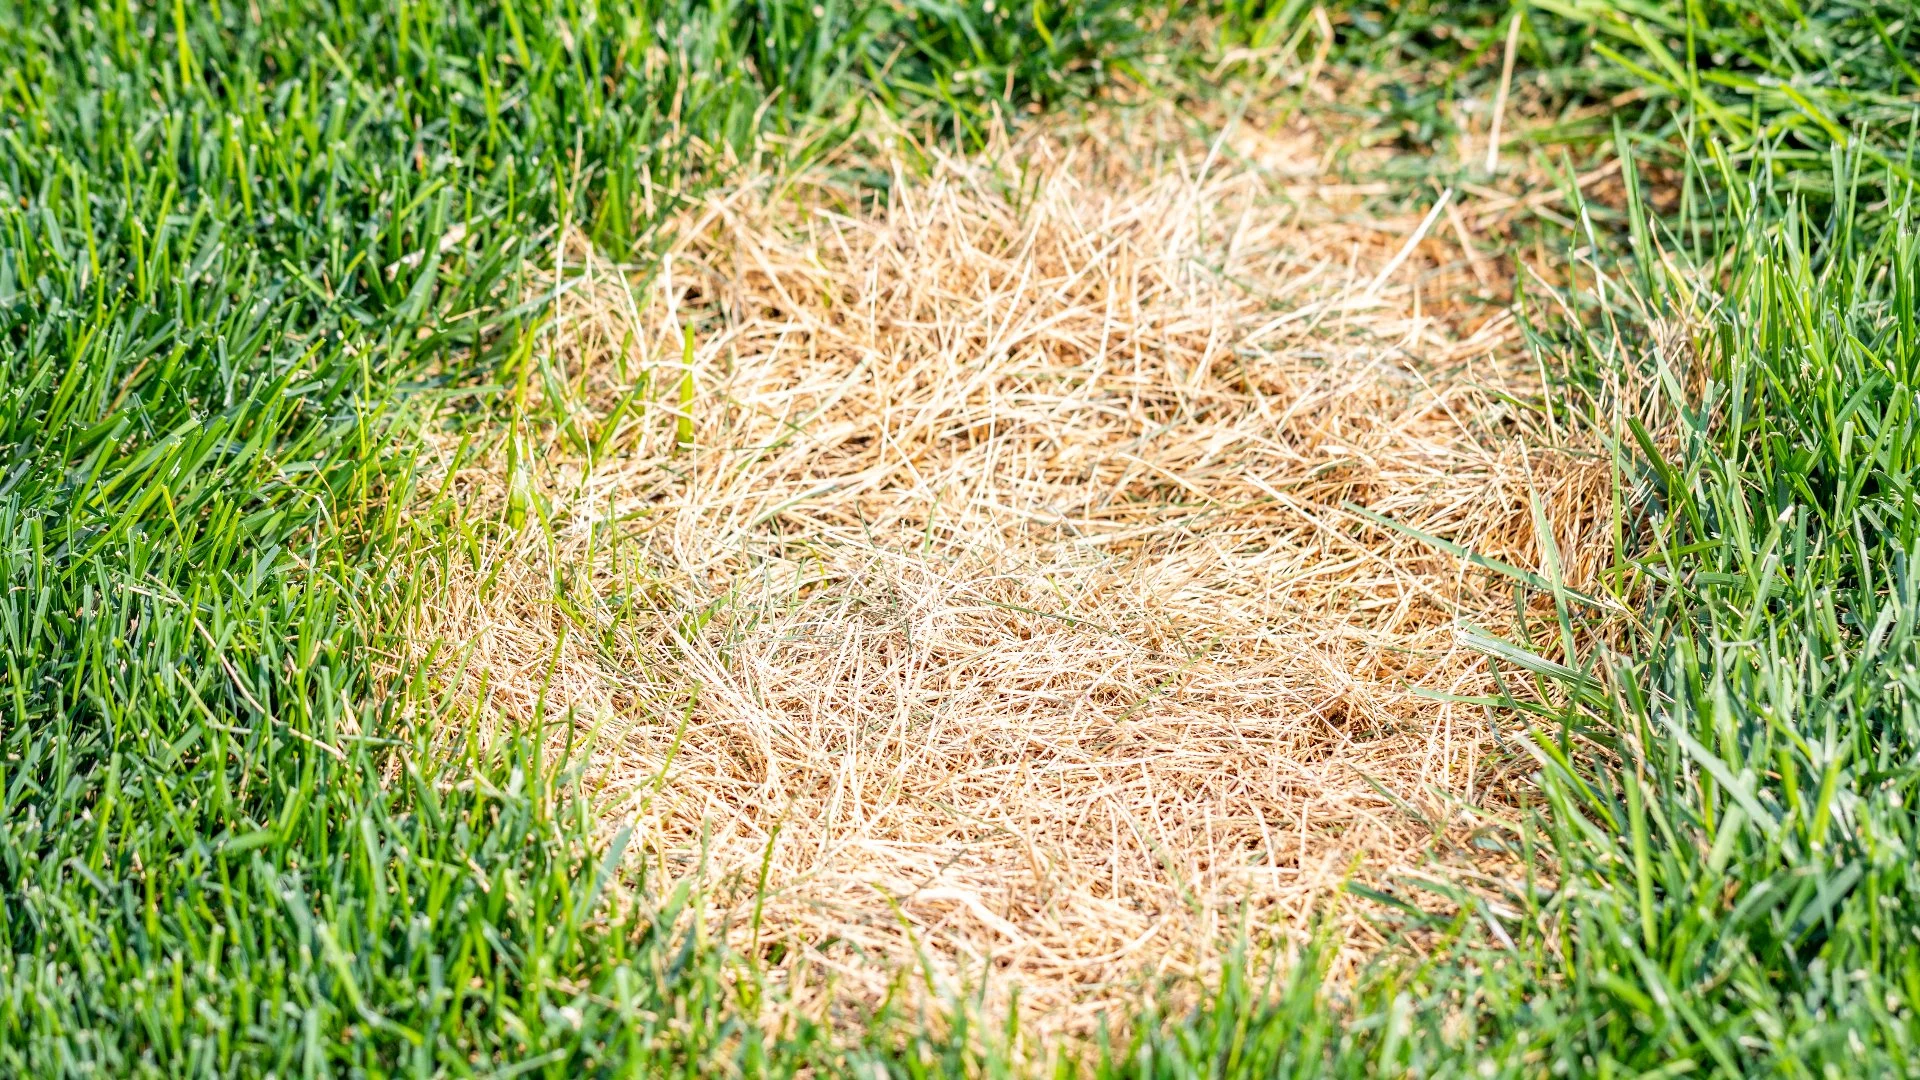 Why Are There Small, Circular Patches of Tan Grass on Your Lawn?